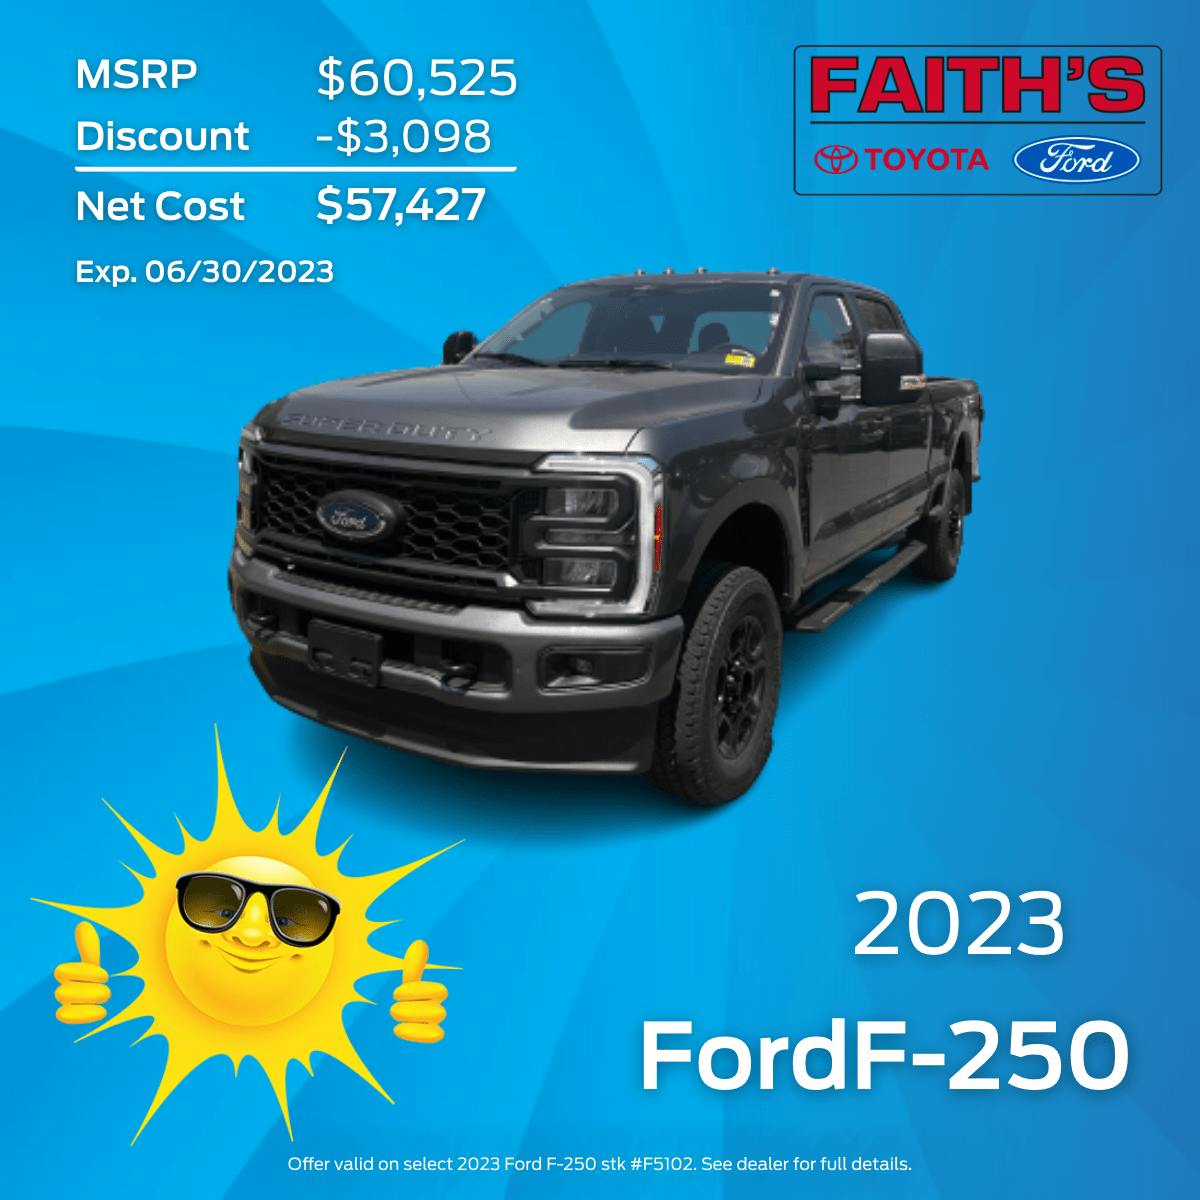 2023 Ford F-250 Purchase Offer | Faiths Ford